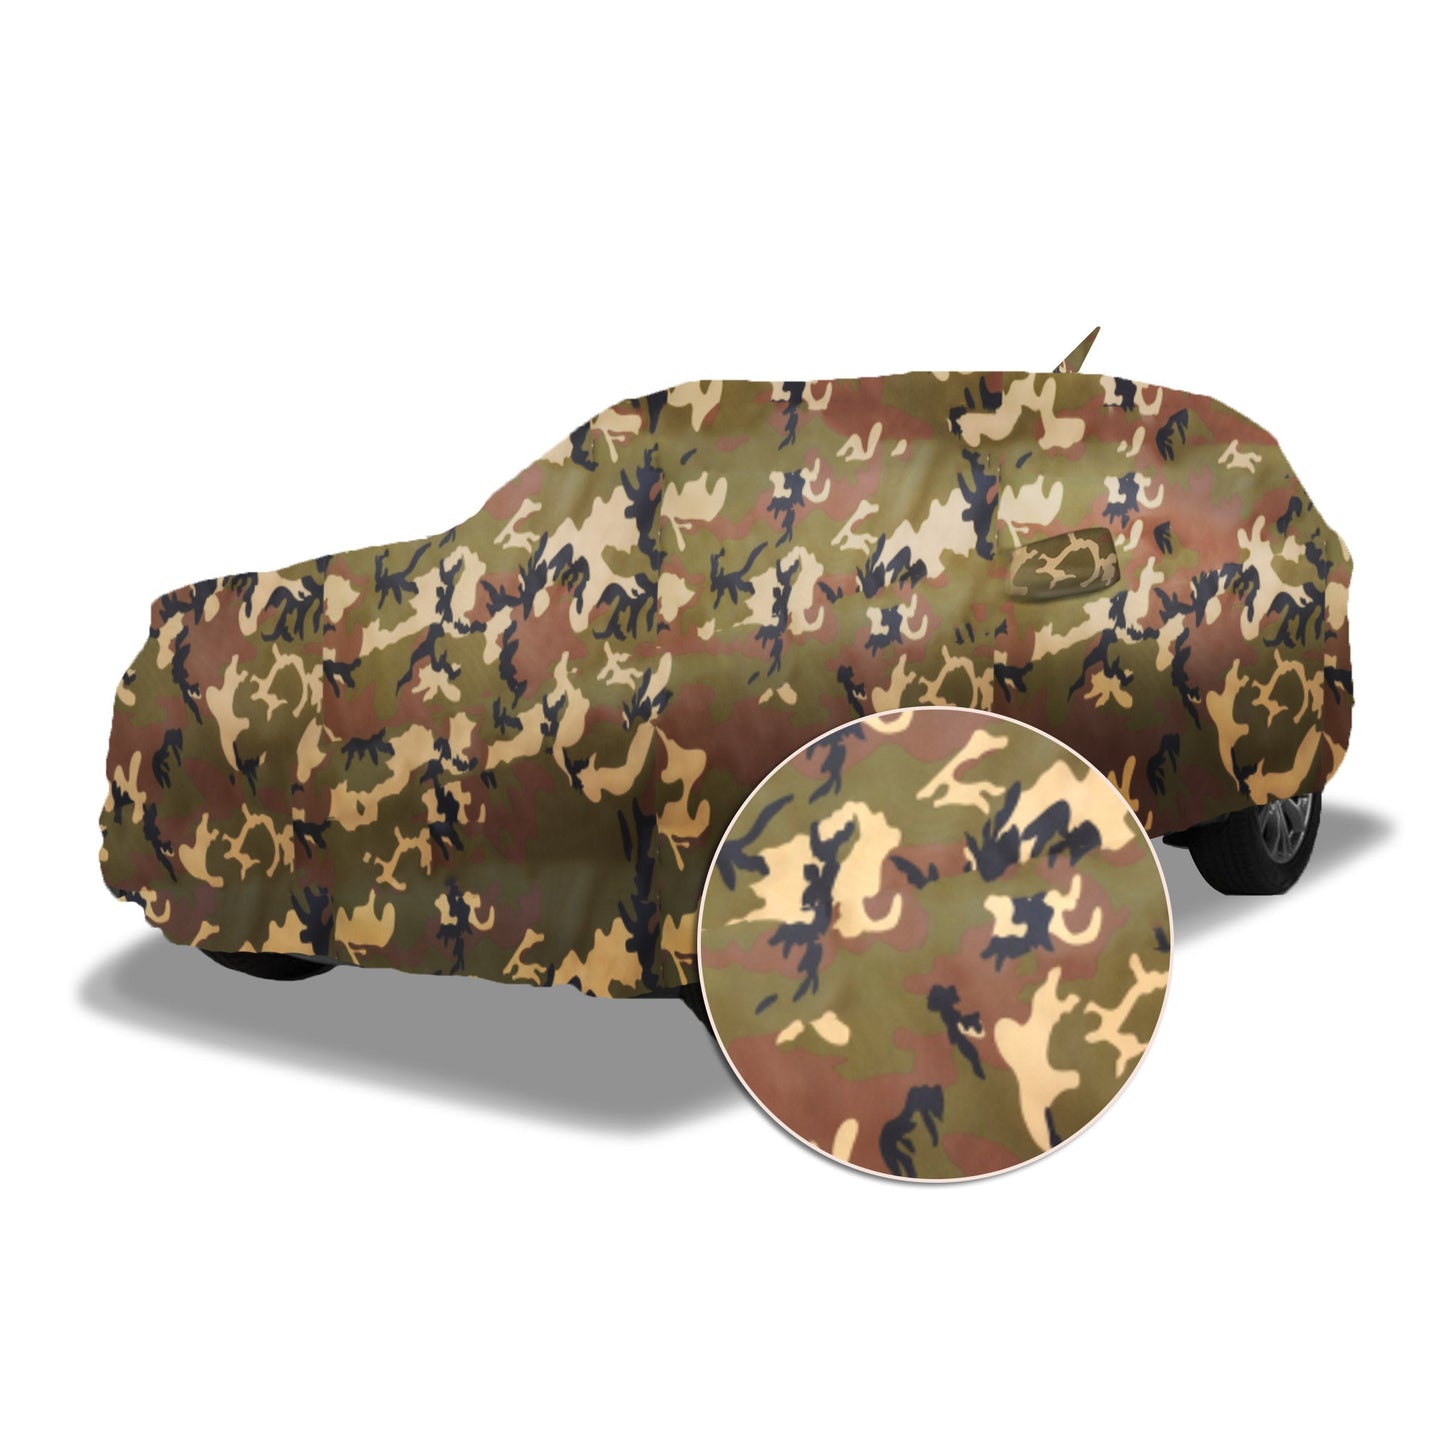 Ascot Mahindra Xylo Car Body Cover Extra Strong & Dust Proof Jungle Military Car Cover with UV Proof & Water-Resistant Coating